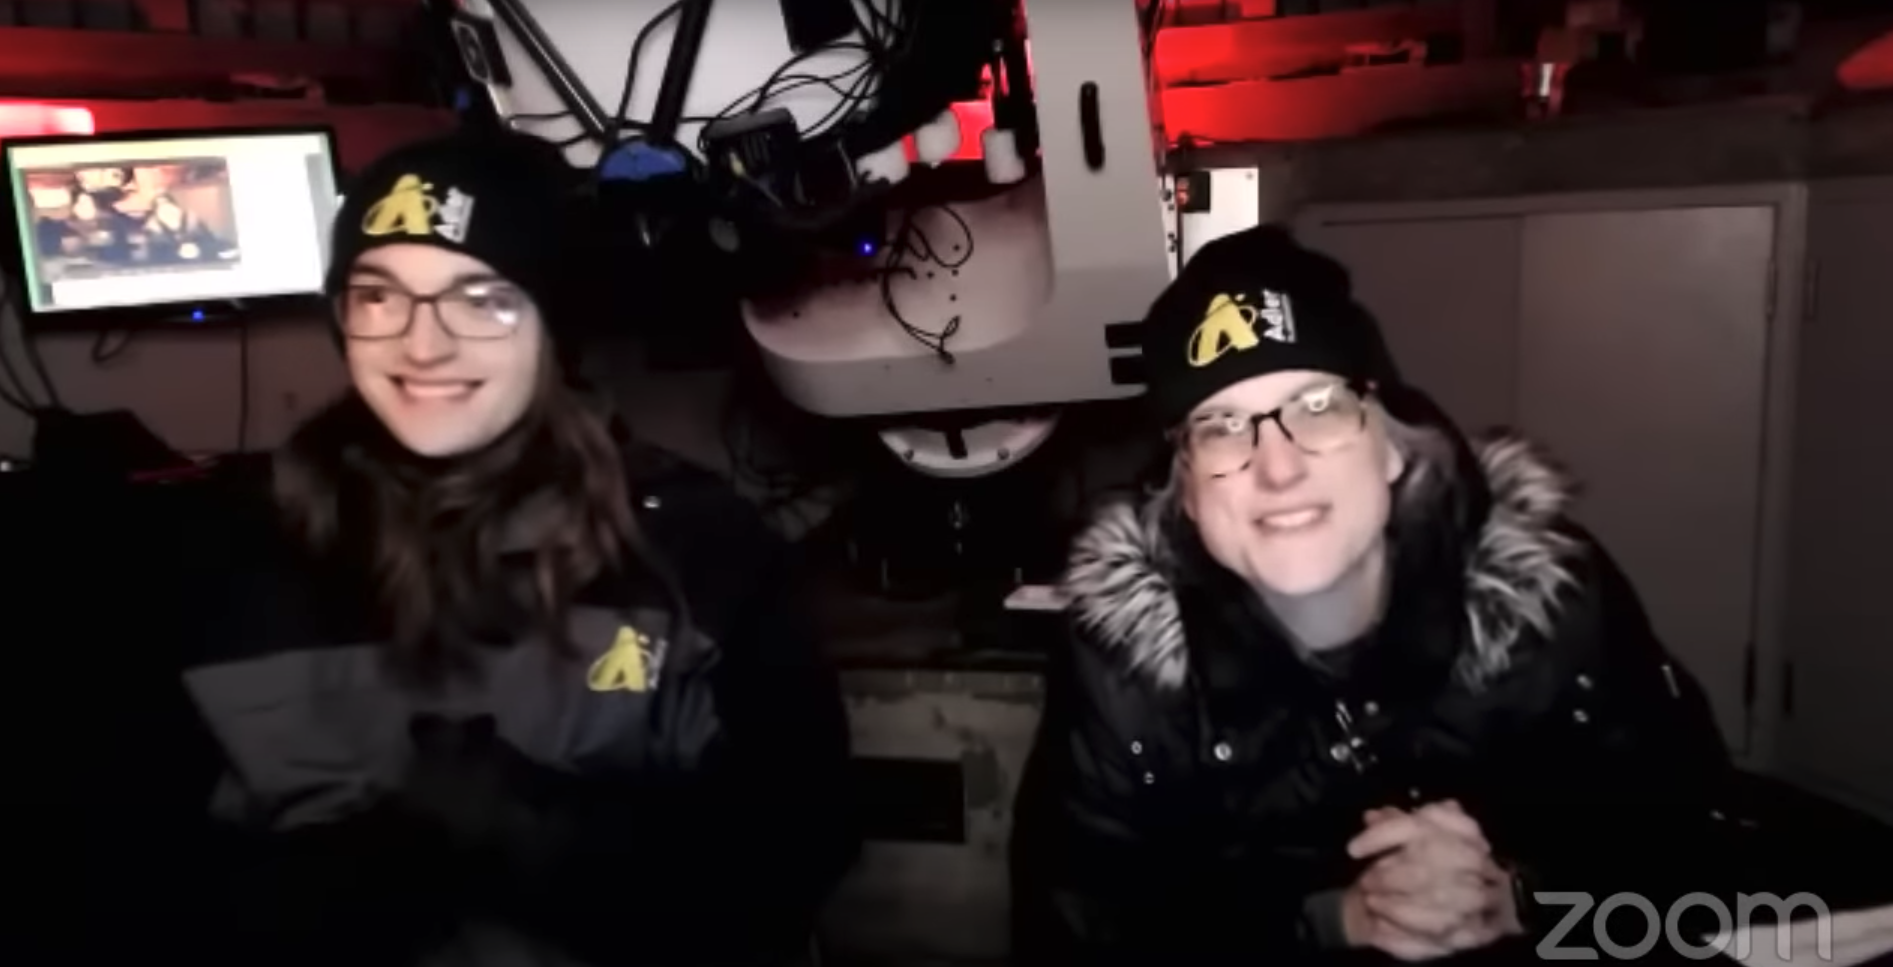 Astronomy educators Hunter and Michelle broadcast live from the Doane Observatory for a Sky Observers Hangout on Zoom. Seen behind Hunter and Michelle (who are wearing winter coats and hats), is a TV monitor, the Doane telescope, and a red light.